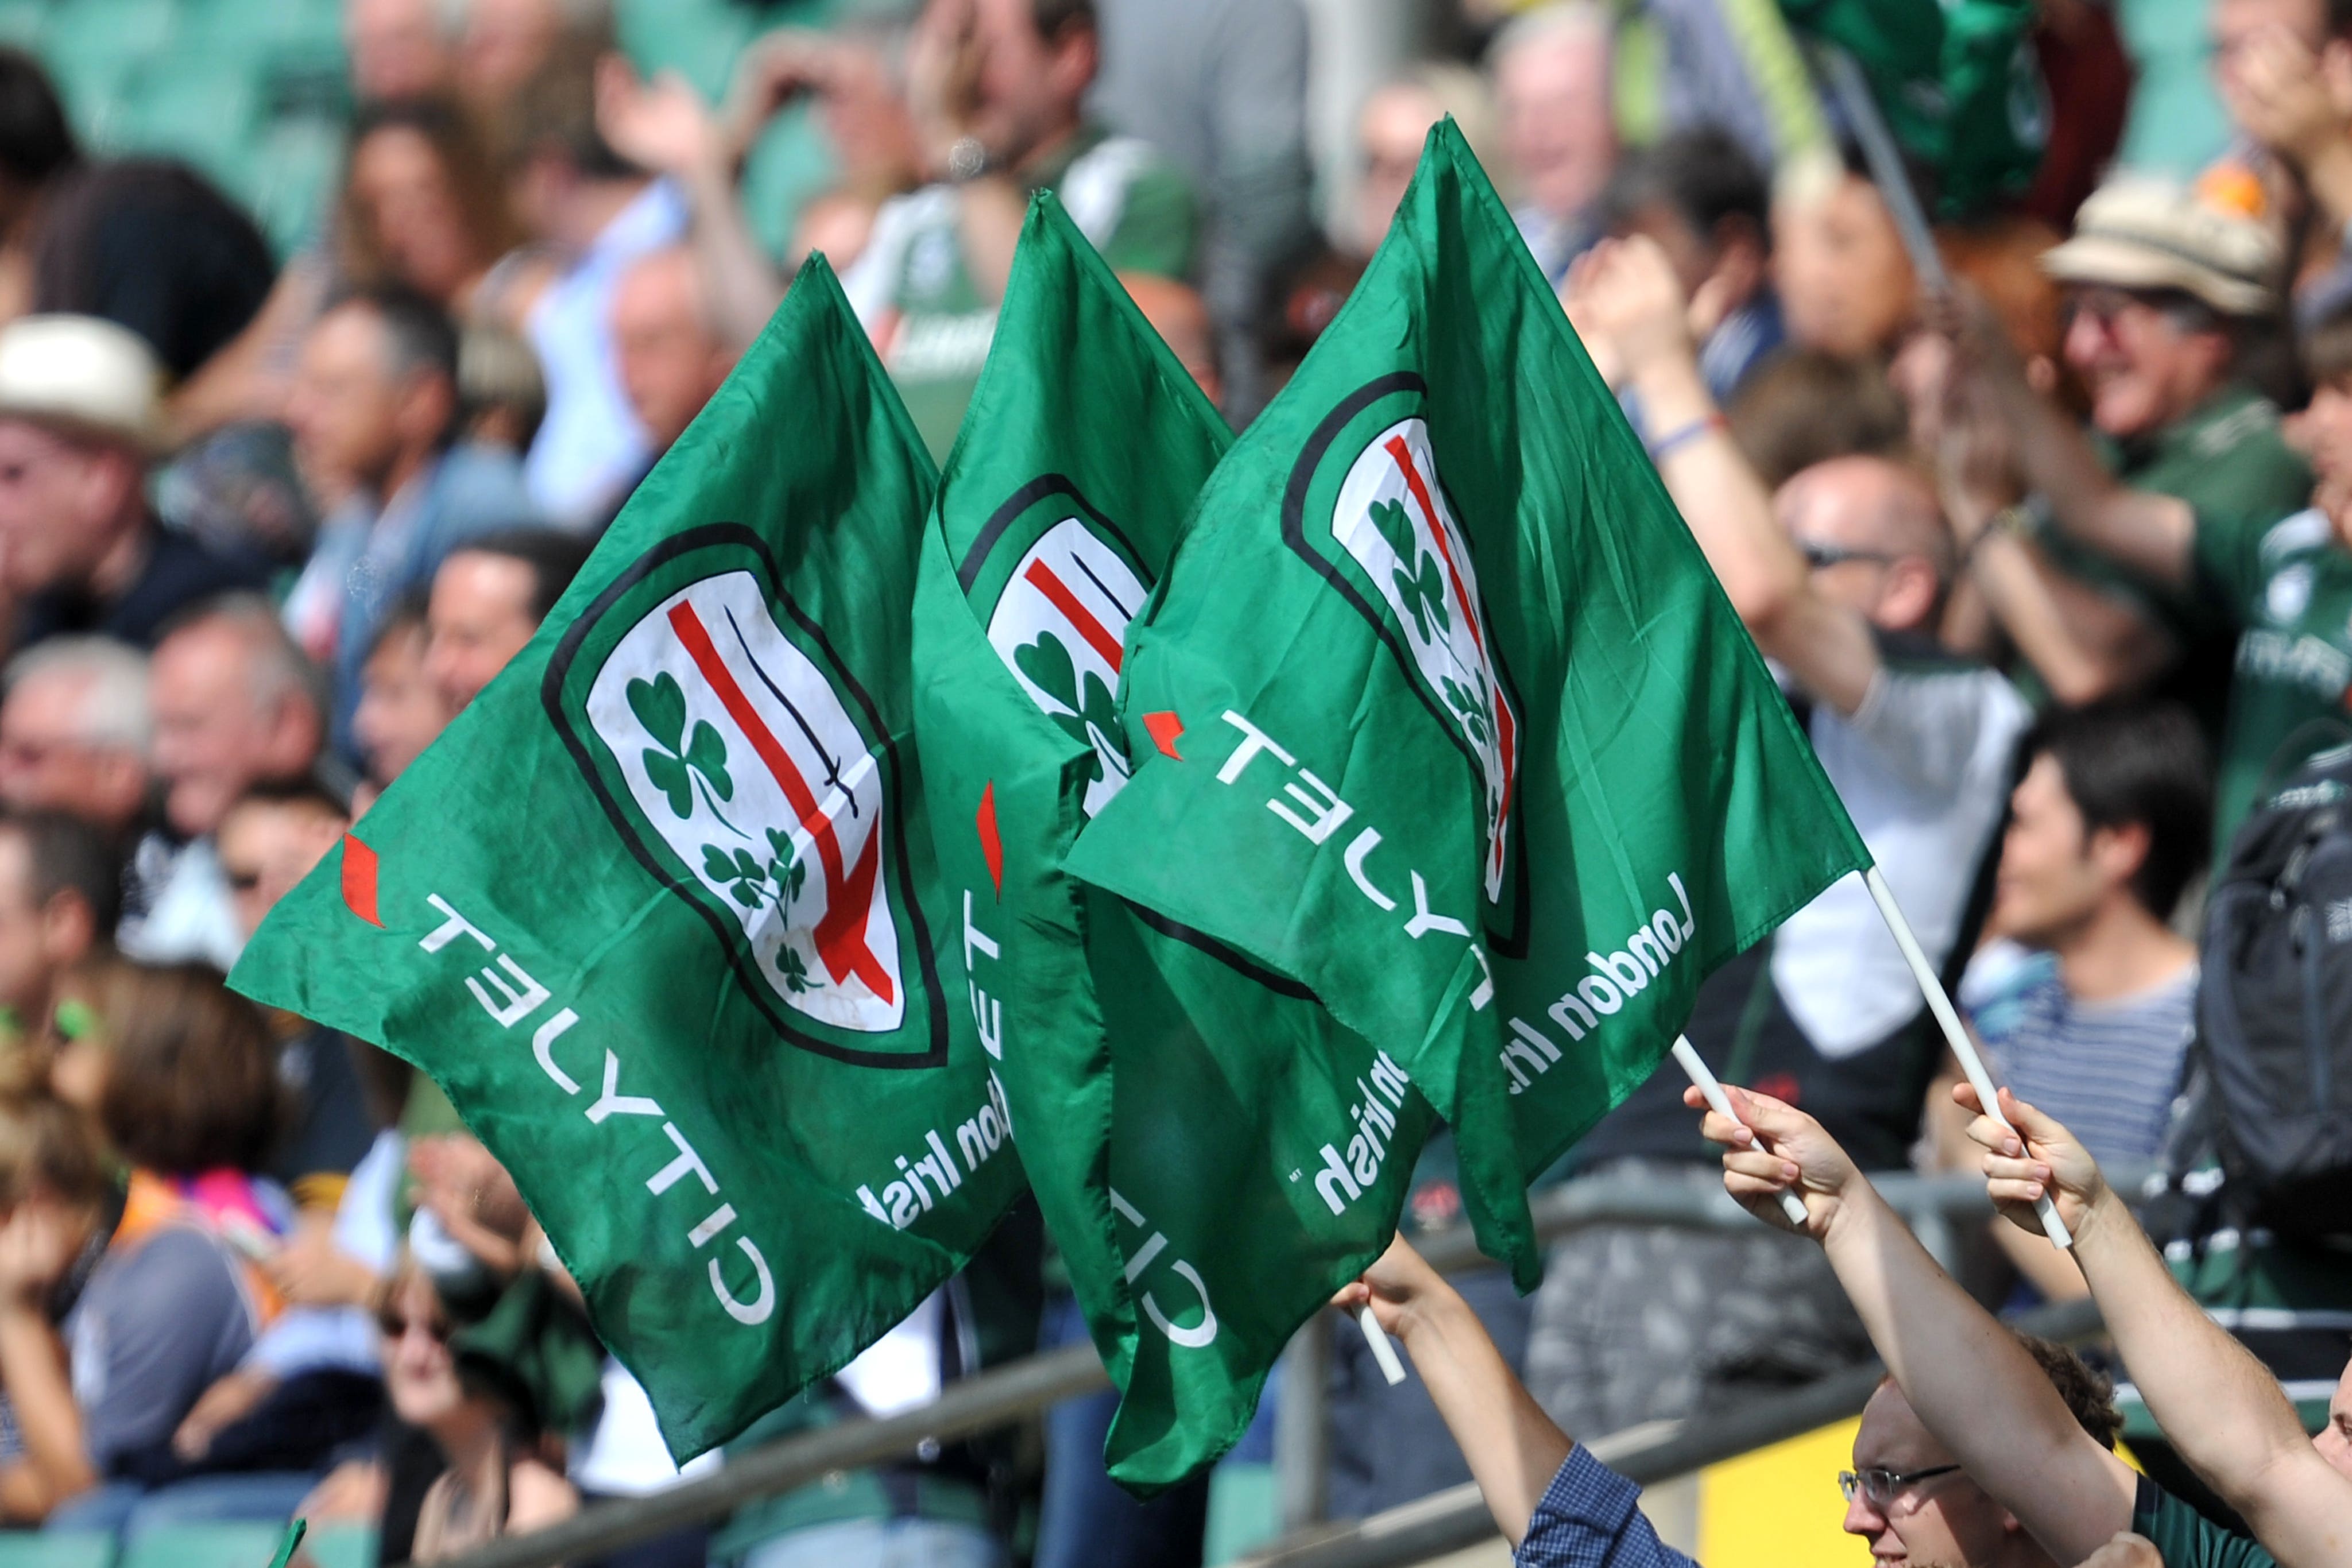 London Irish have been suspended from the Premiership